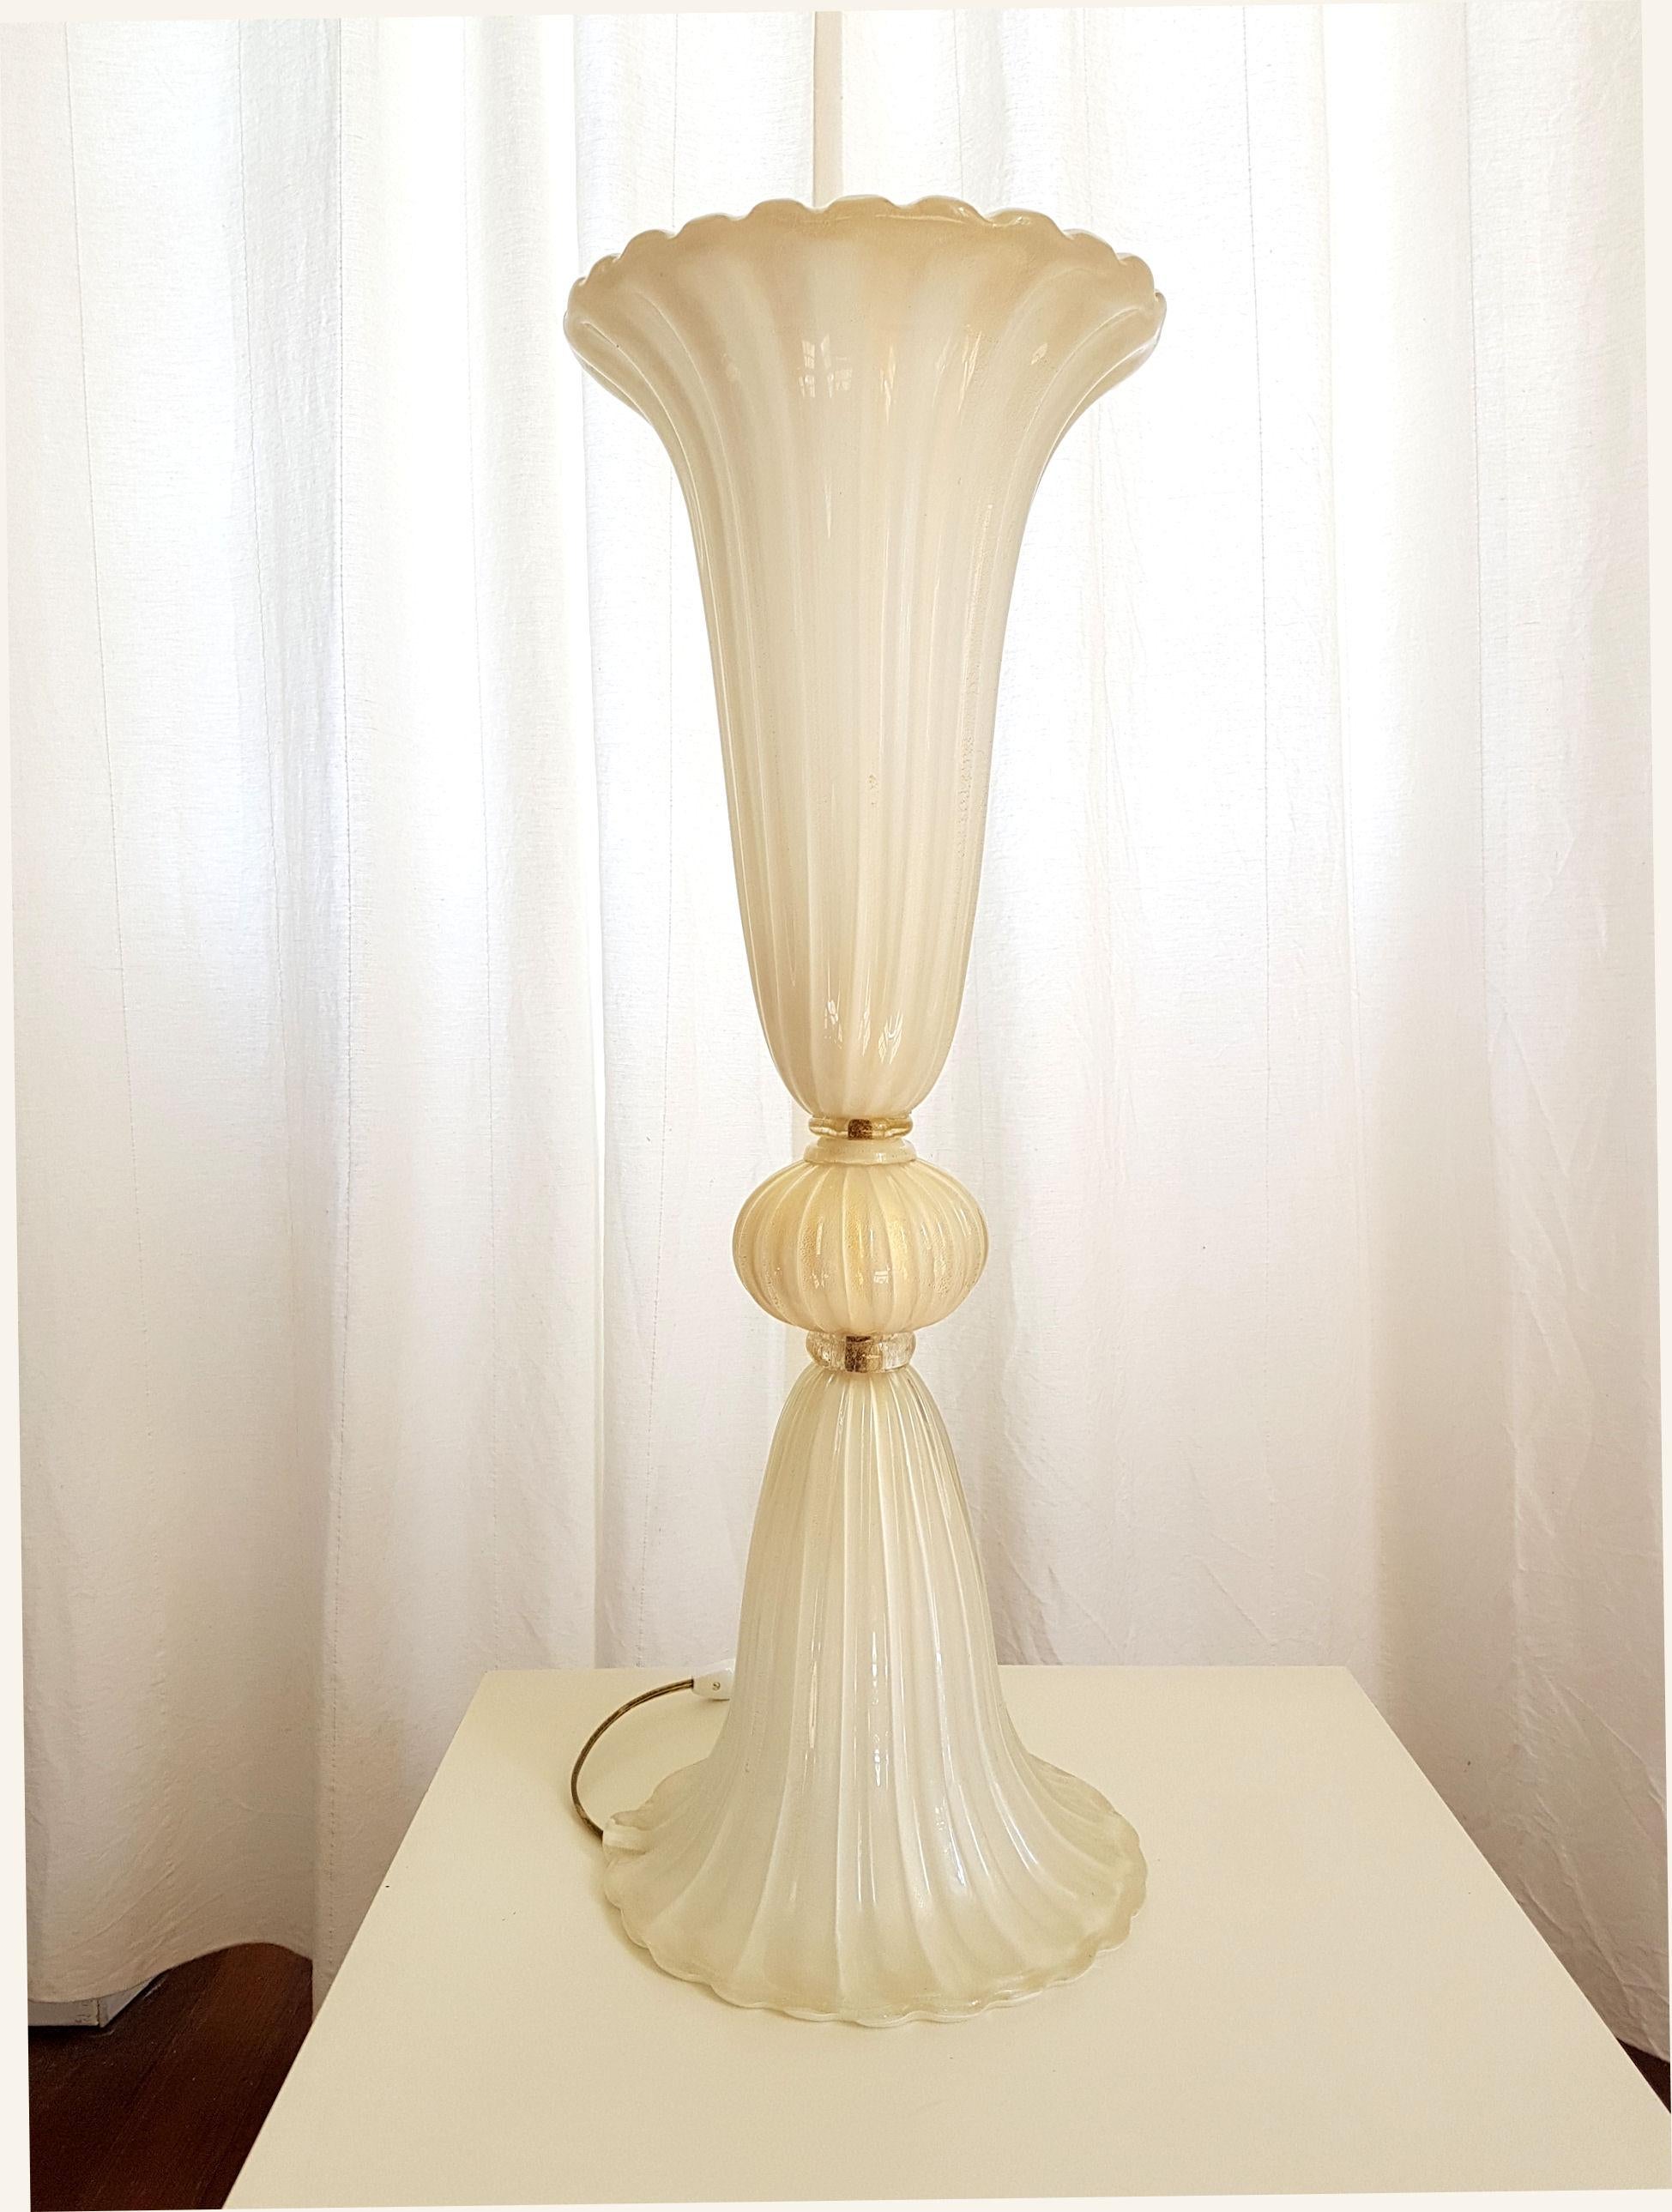 Barovier and Toso style, Mid-Century Modern pair of extra large table lamps, or floor lamps in hand blown Murano glass.
Murano, Italy, 1970s.
The neoclassical style lamps are made of handmade translucent white Murano glass, with gold inclusions.